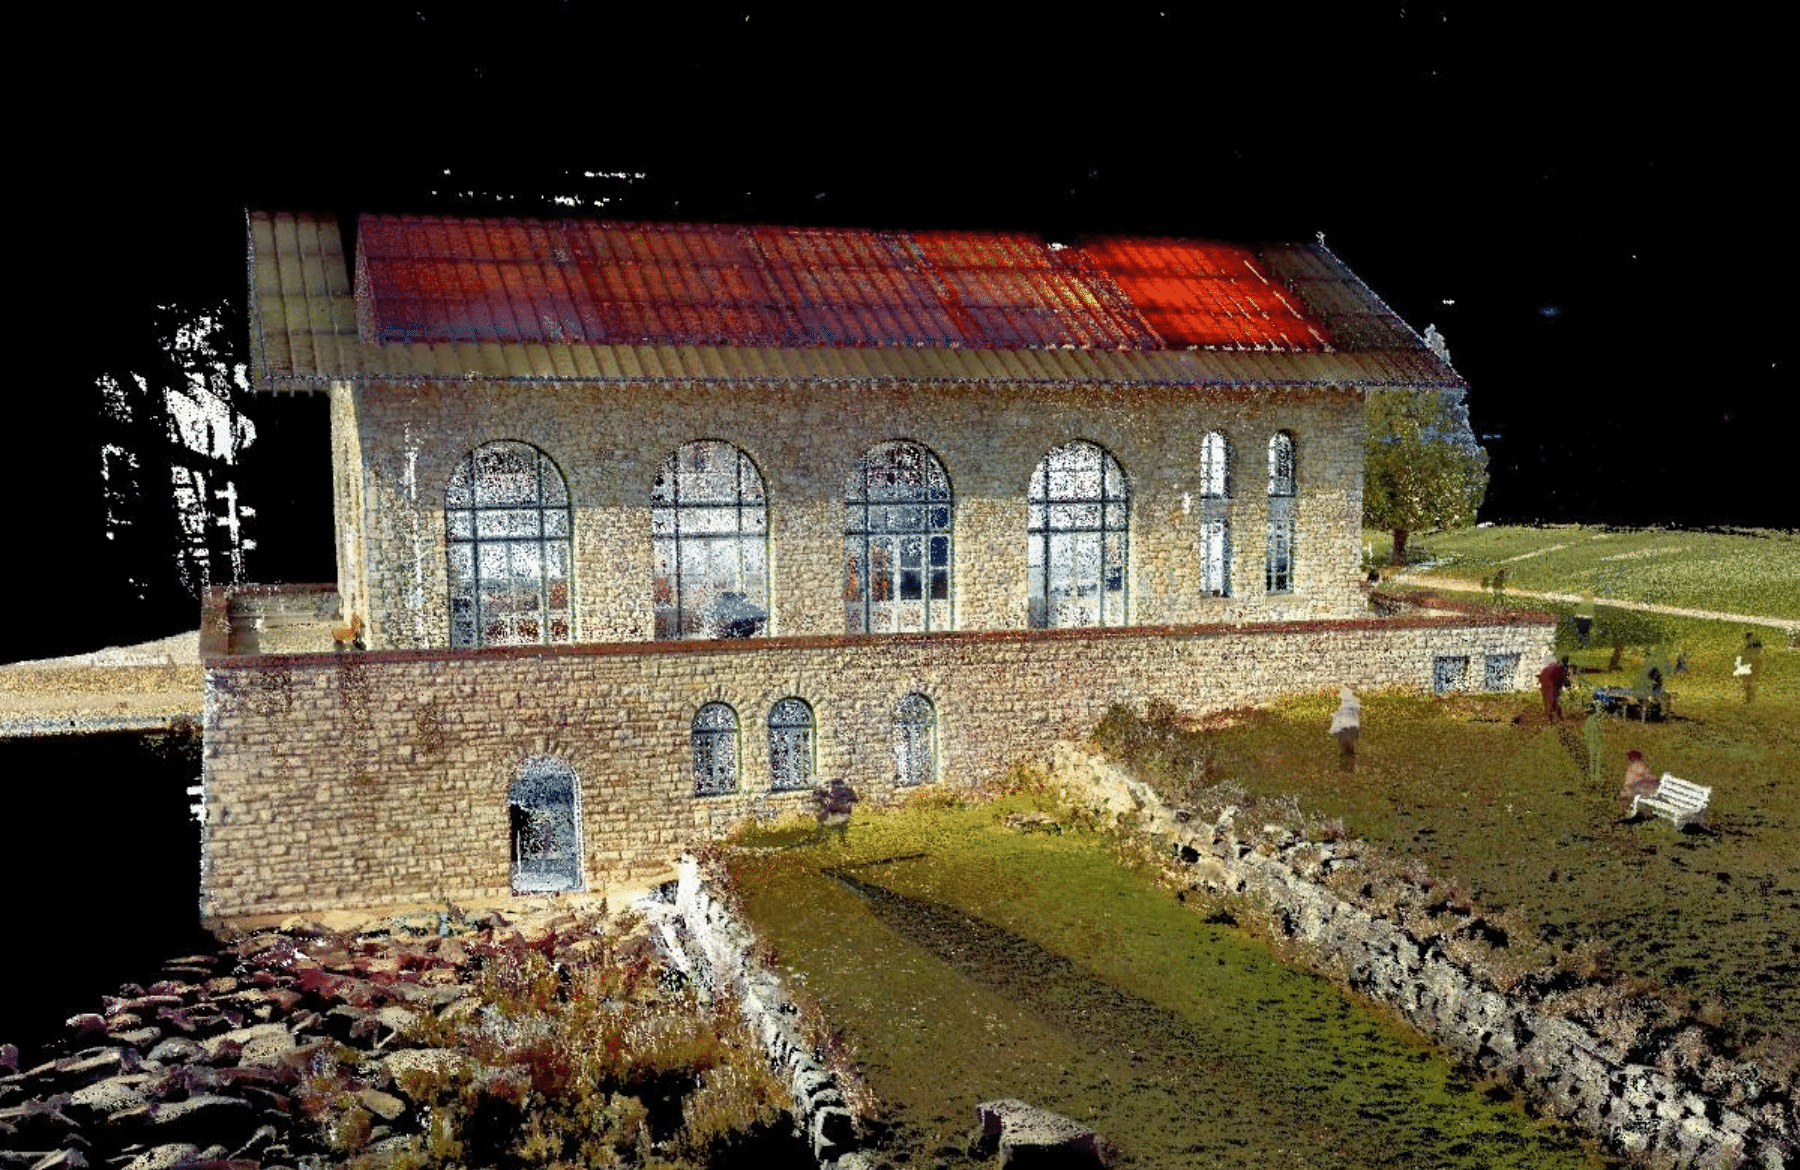 Point cloud created from LIDAR laser scanning